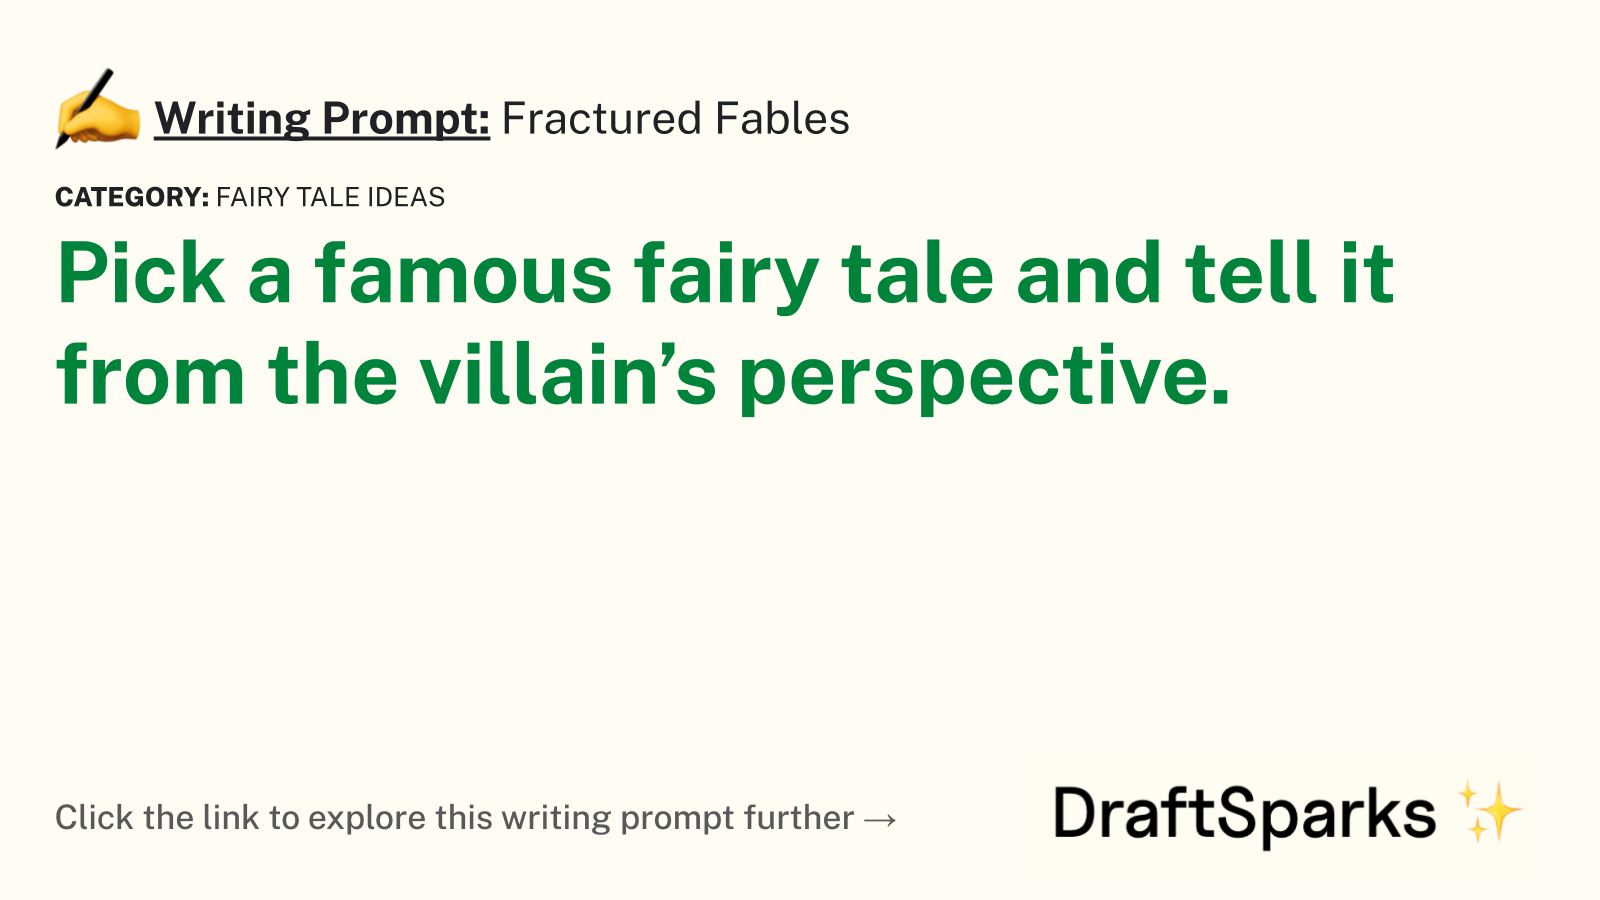 Fractured Fables